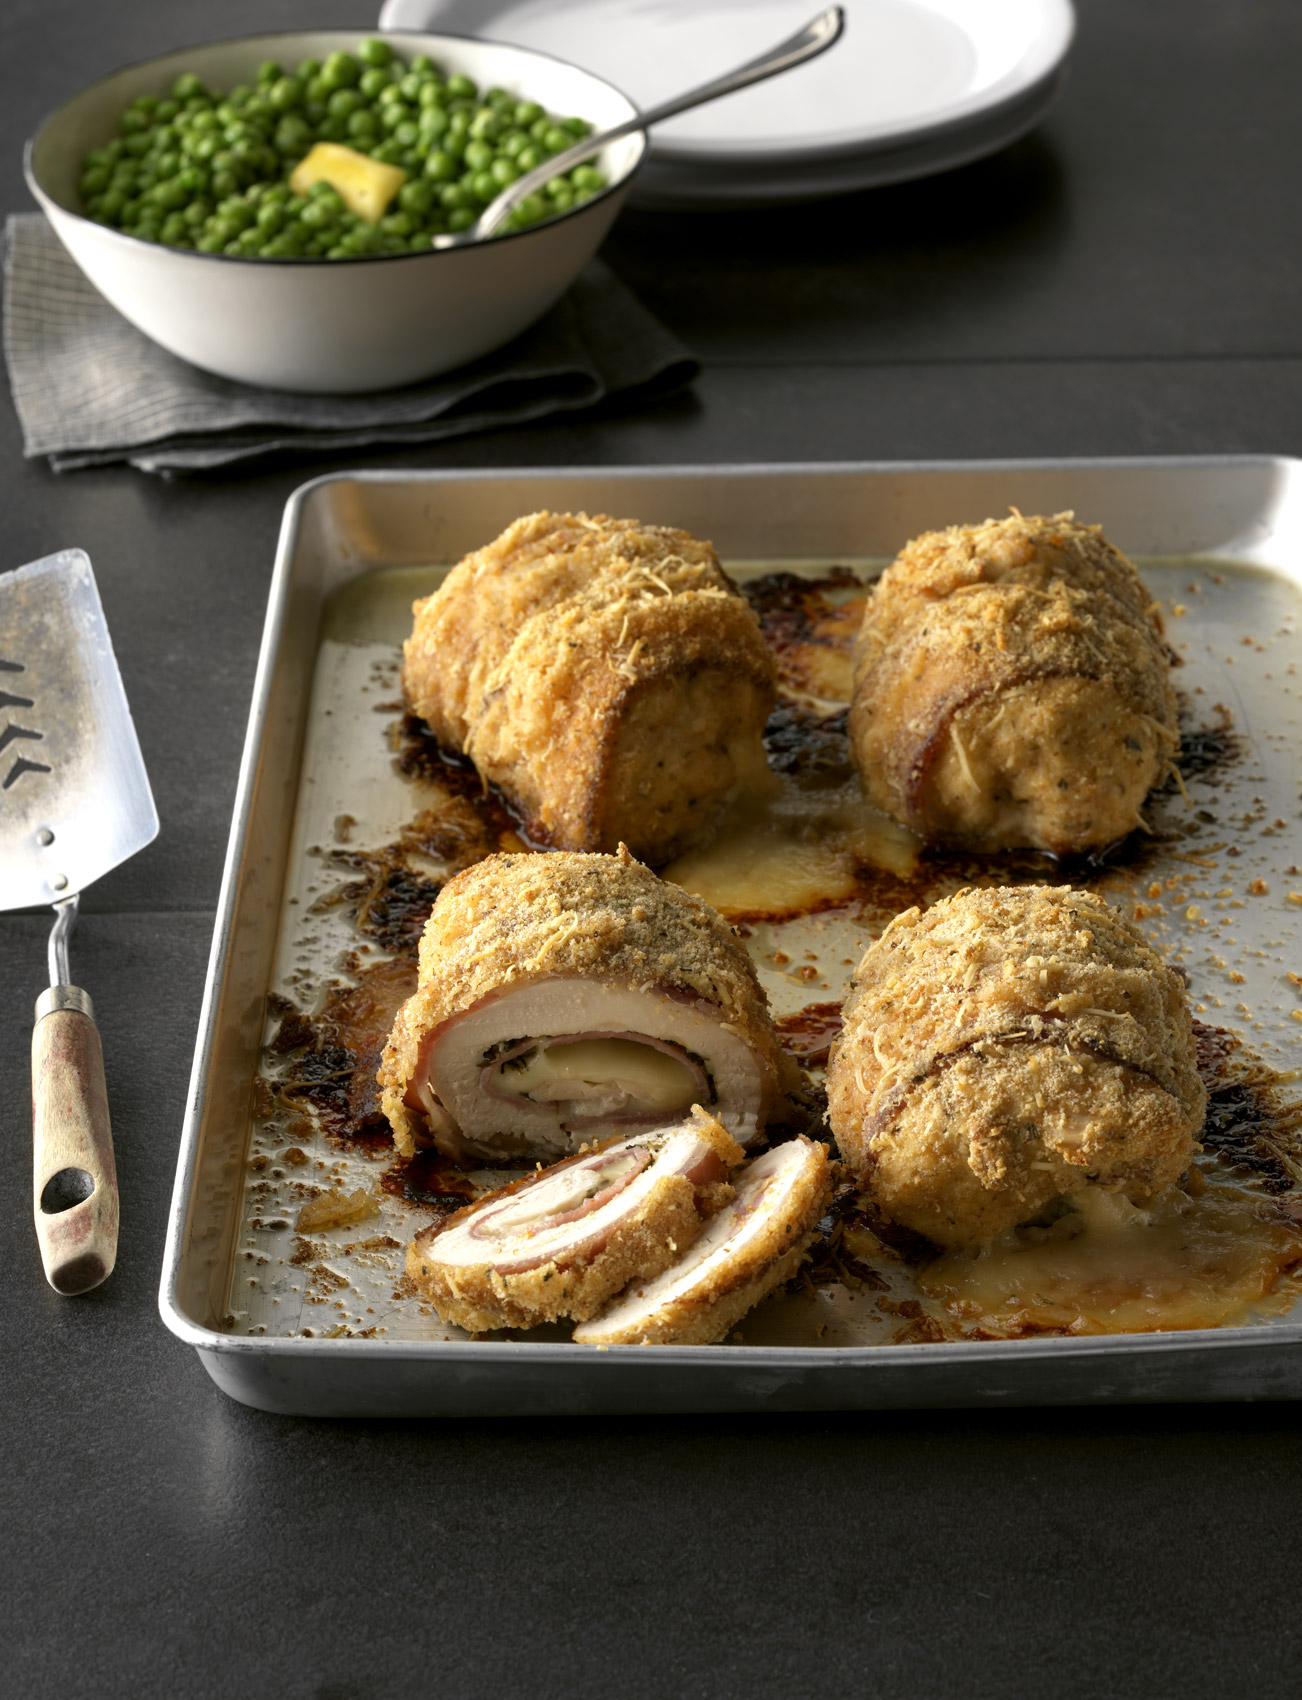 Chicken Cordon Bleu photo by Chris Kessler Photography.  Chris Kessler is a freelance Photographer based in Milwaukee Wisconsin. Specializing in Food photography and portraiture.